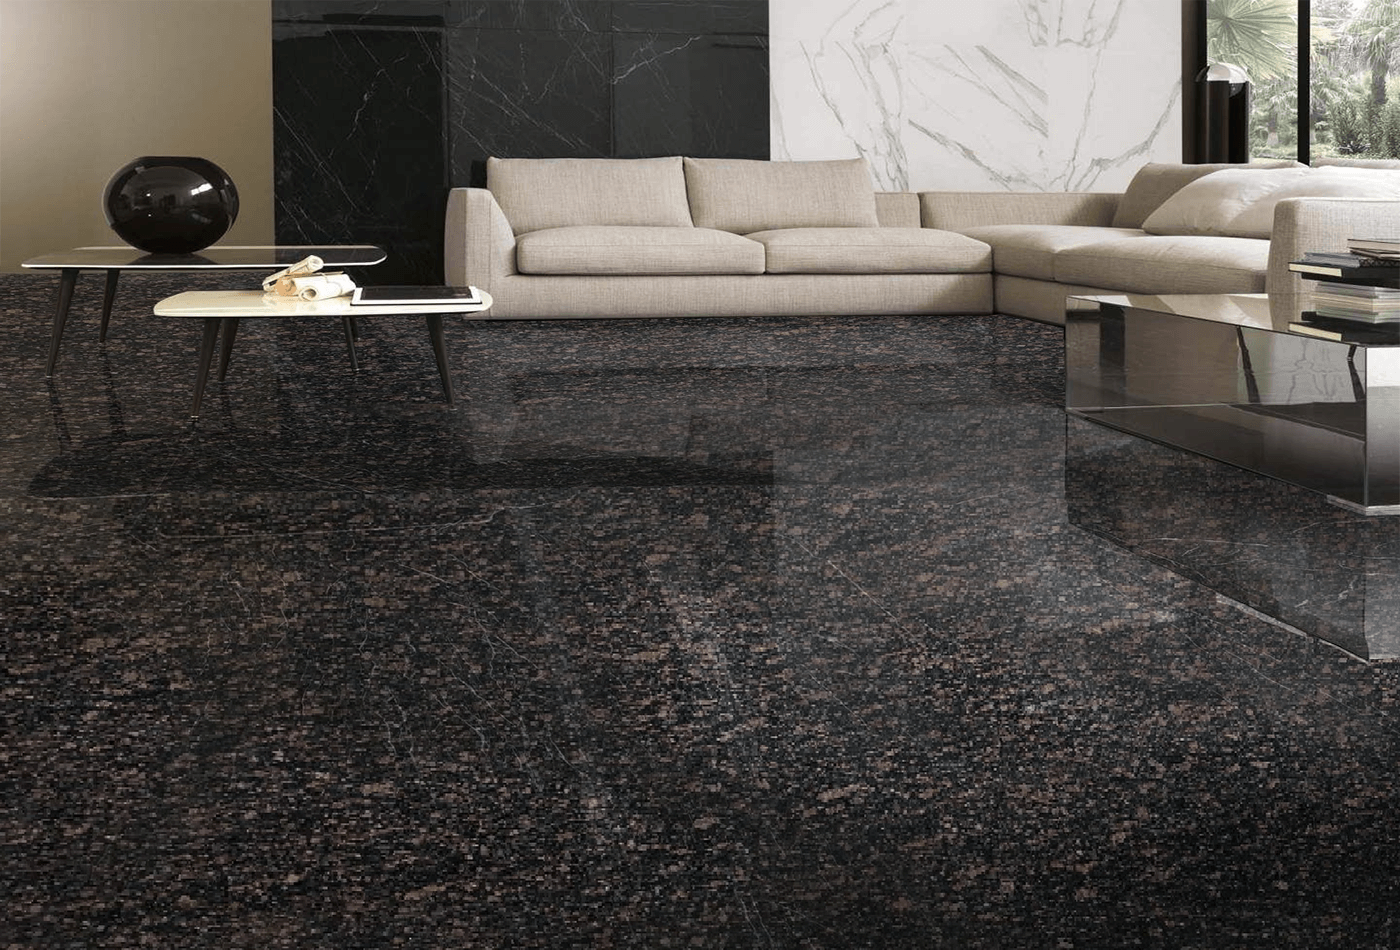 With its lone textured, it breathes life into the inside and external granite floor